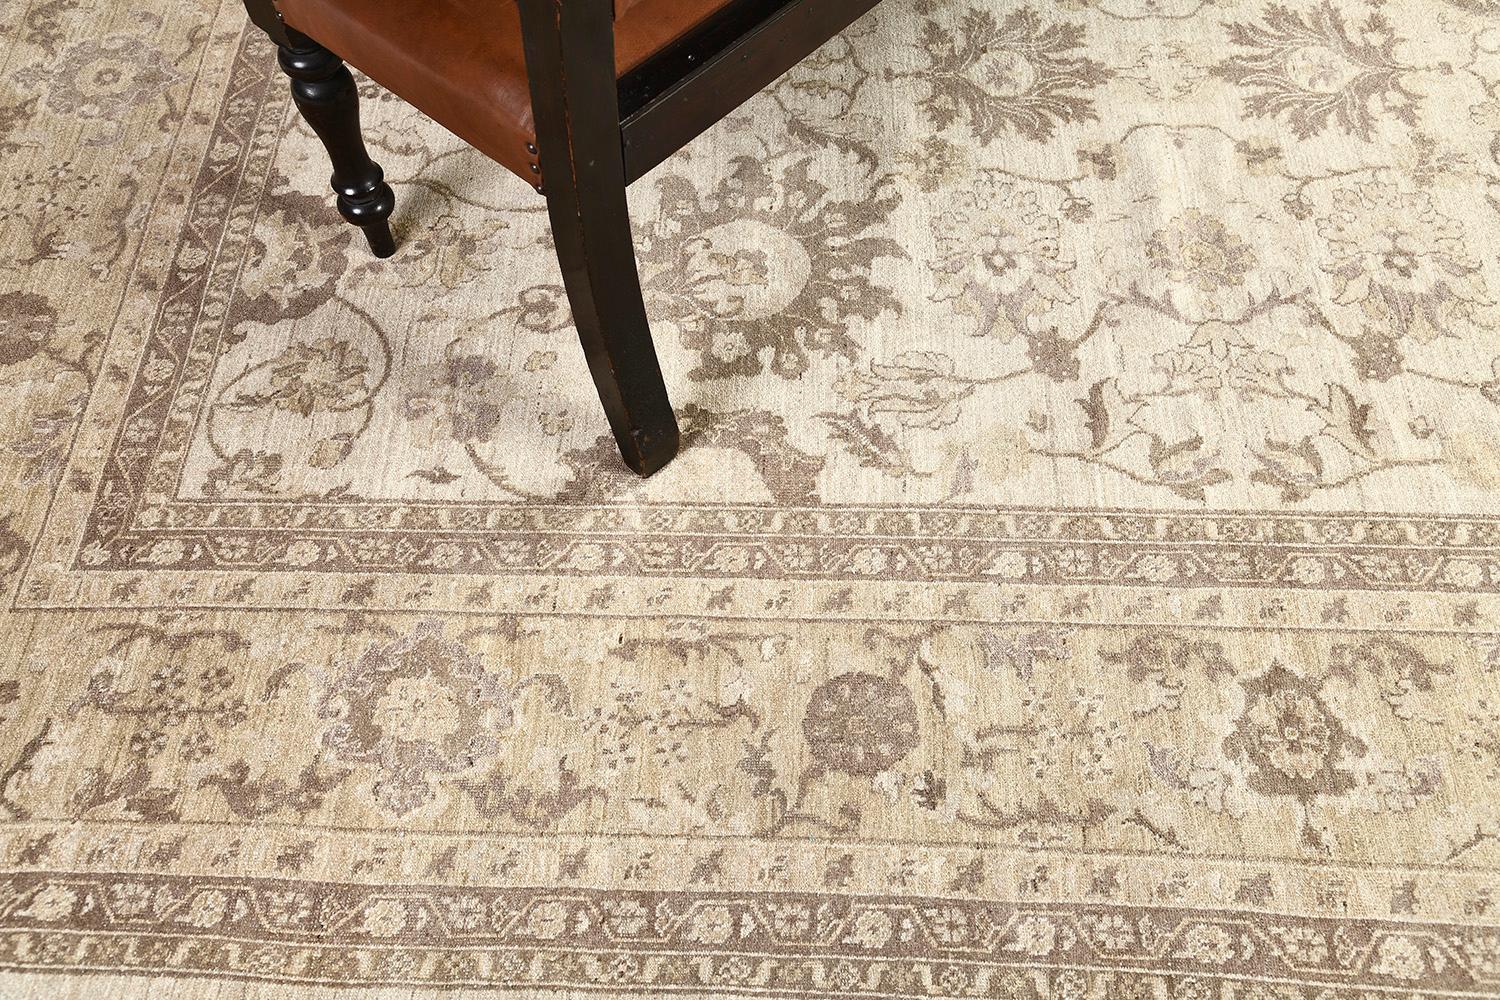 A soft version of the Sultanabad vintage style rug features an all-over design of palmettes, vine scrolls, and leafy tendrils. Stunning wool woven in neutral tones enhanced the whole artistry of this creation. Stylized motifs of the borders add